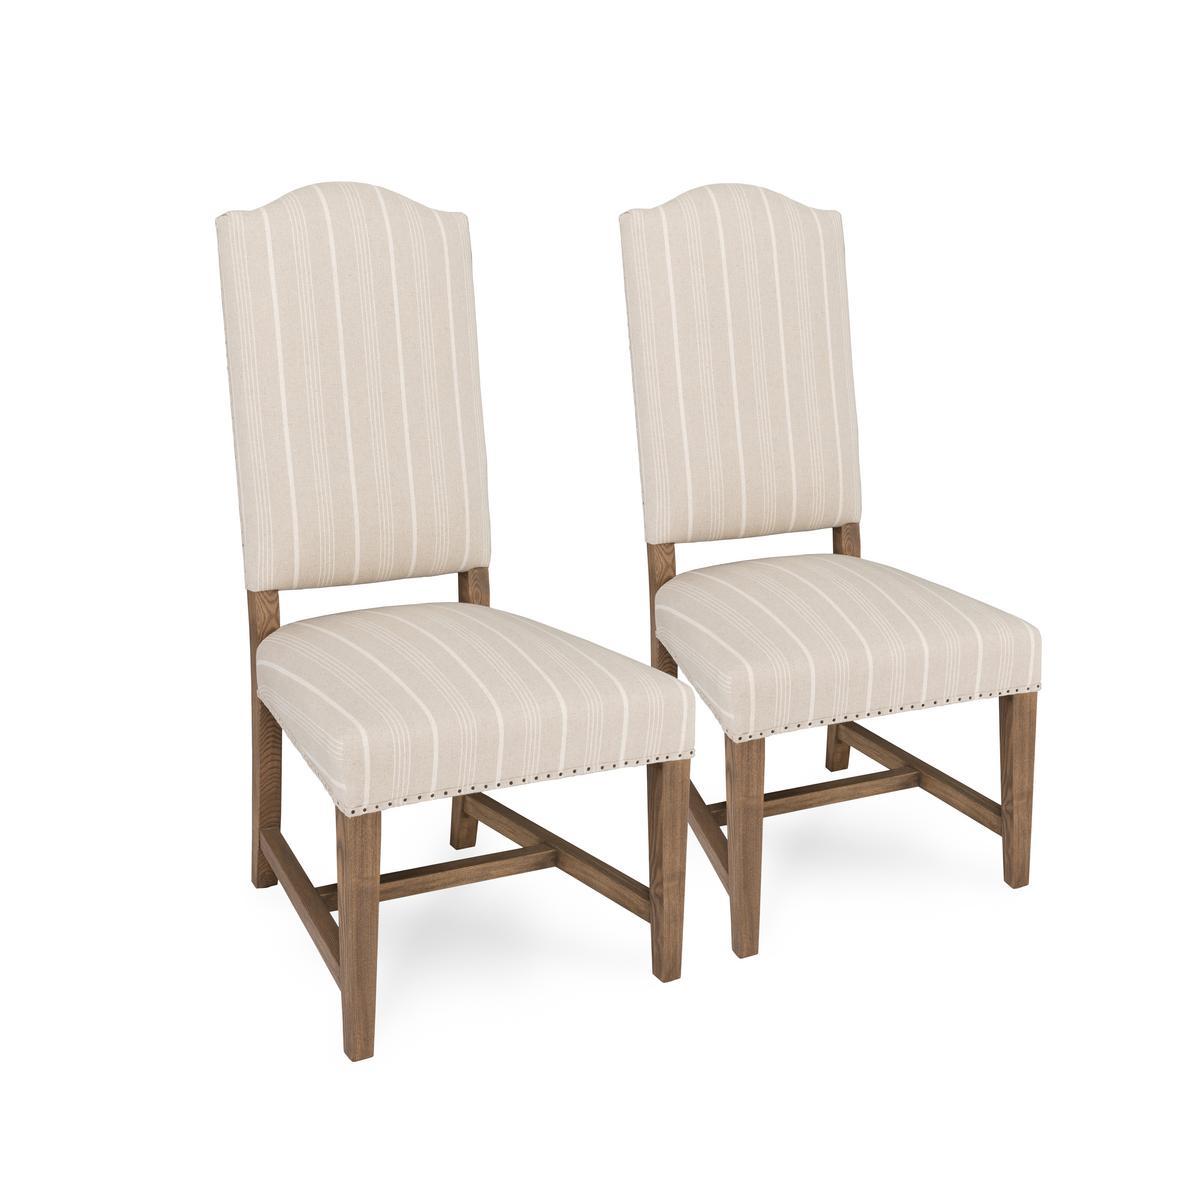 Astoria - Upholstered Dining Chair (Set of 2) - Beige